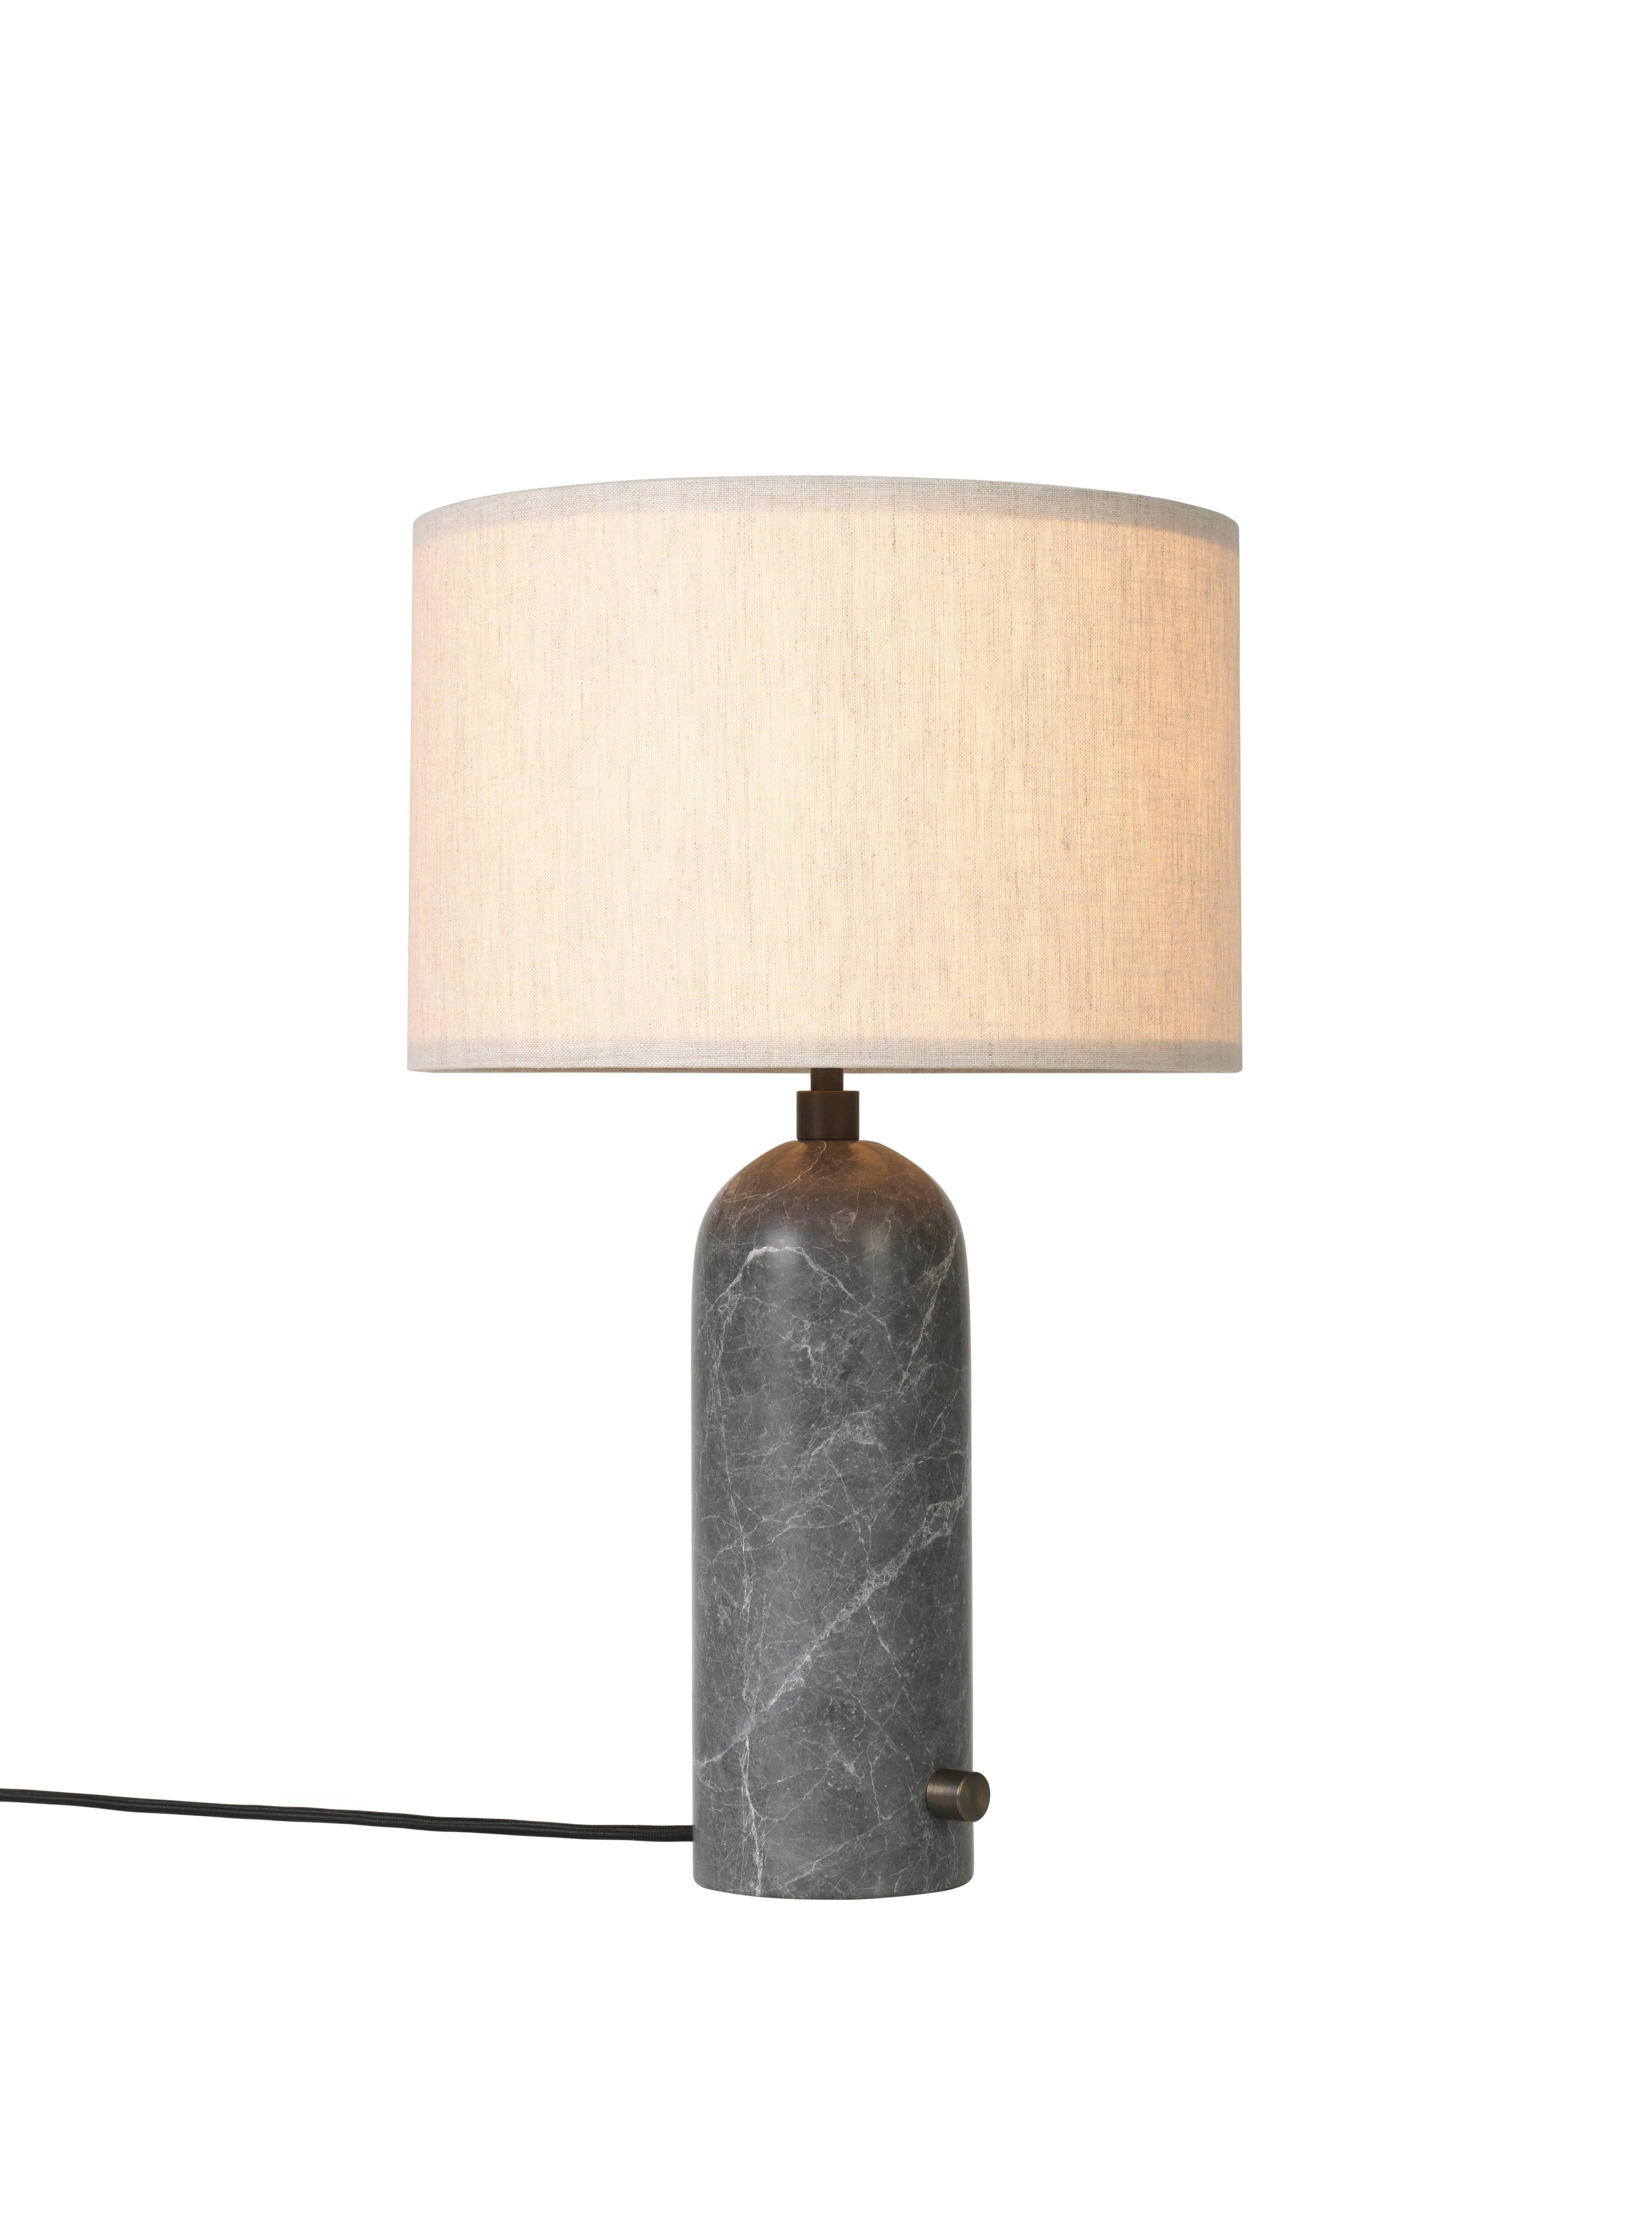 'Gravity' grey marble table lamp 
Dimensions: 65 x 41 x 41 cm
Material: Marble
Designer: Louis Weisdorf
Produced by Gubi in Denmark

The new Gravity Collection designed by Space
Copenhagen, consisting of a table lamp and a floor
lamp, is